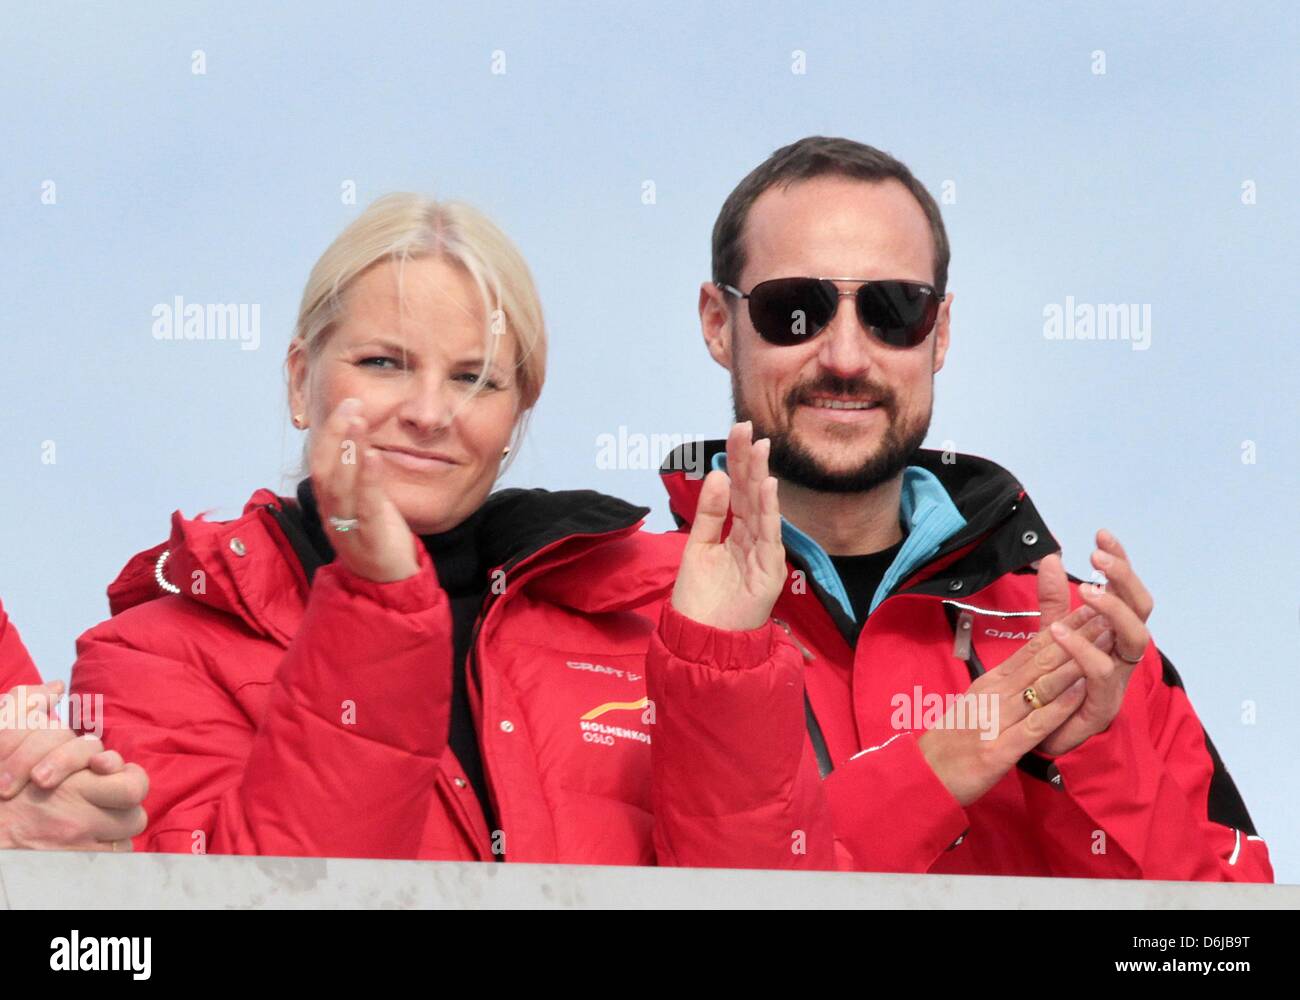 Crown Princess Mette-Marit and Crown Prince Haakon of Norway visit the ski jumping FIS World Cup at the Holmenkollen in Oslo, Norway, 11 March 2012. Photo: Albert Nieboer / NETHERLANDS OUT Stock Photo